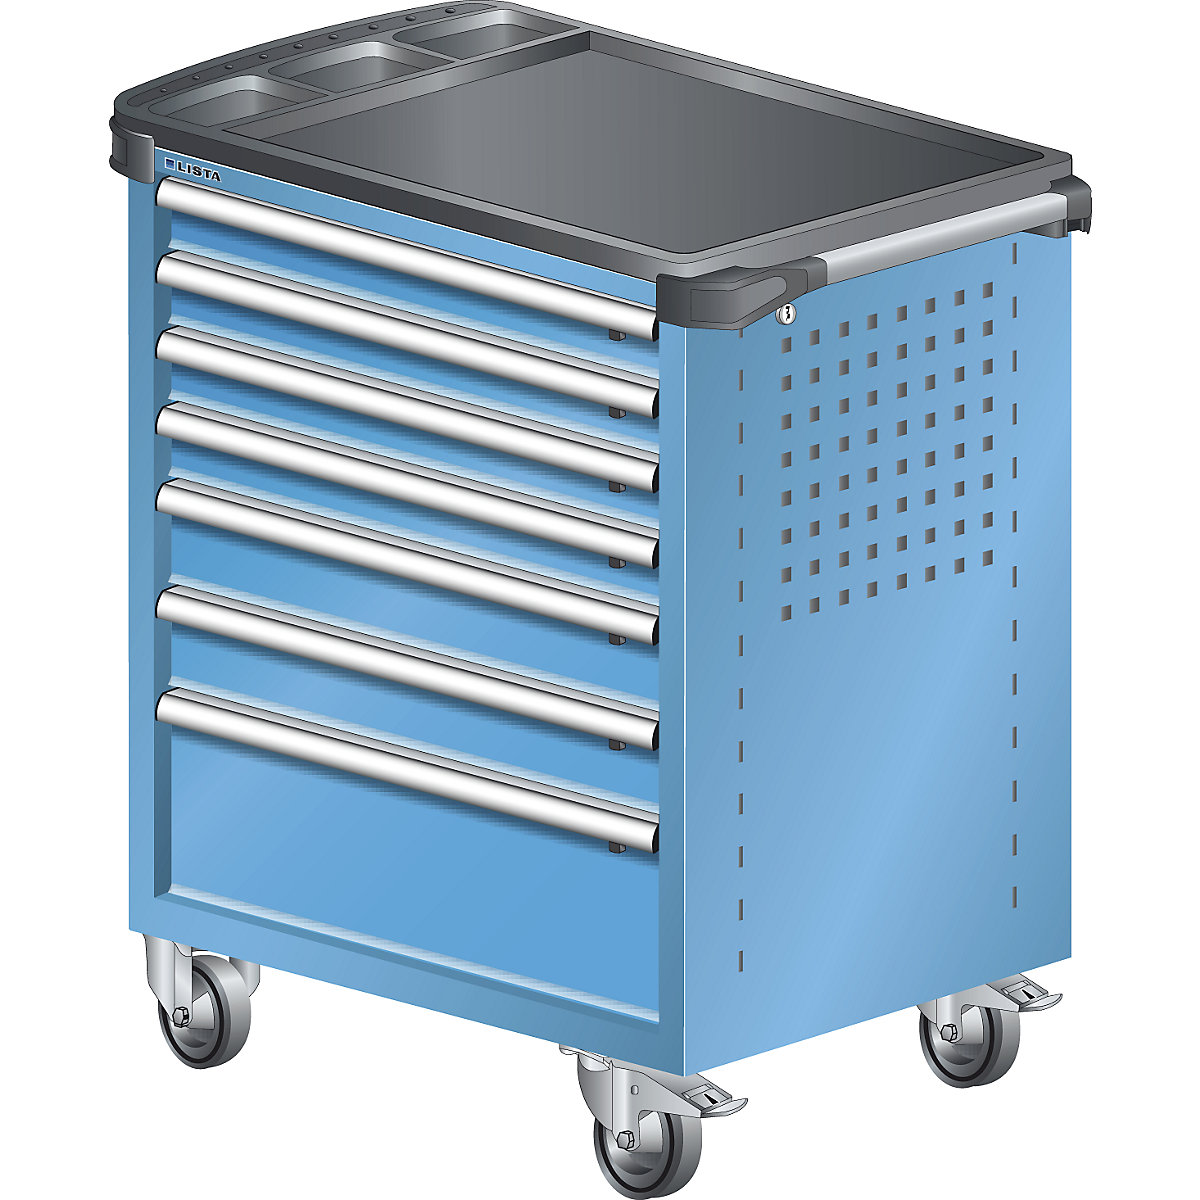 Workshop trolley – LISTA, with plastic cover, 7 drawers, blue-3